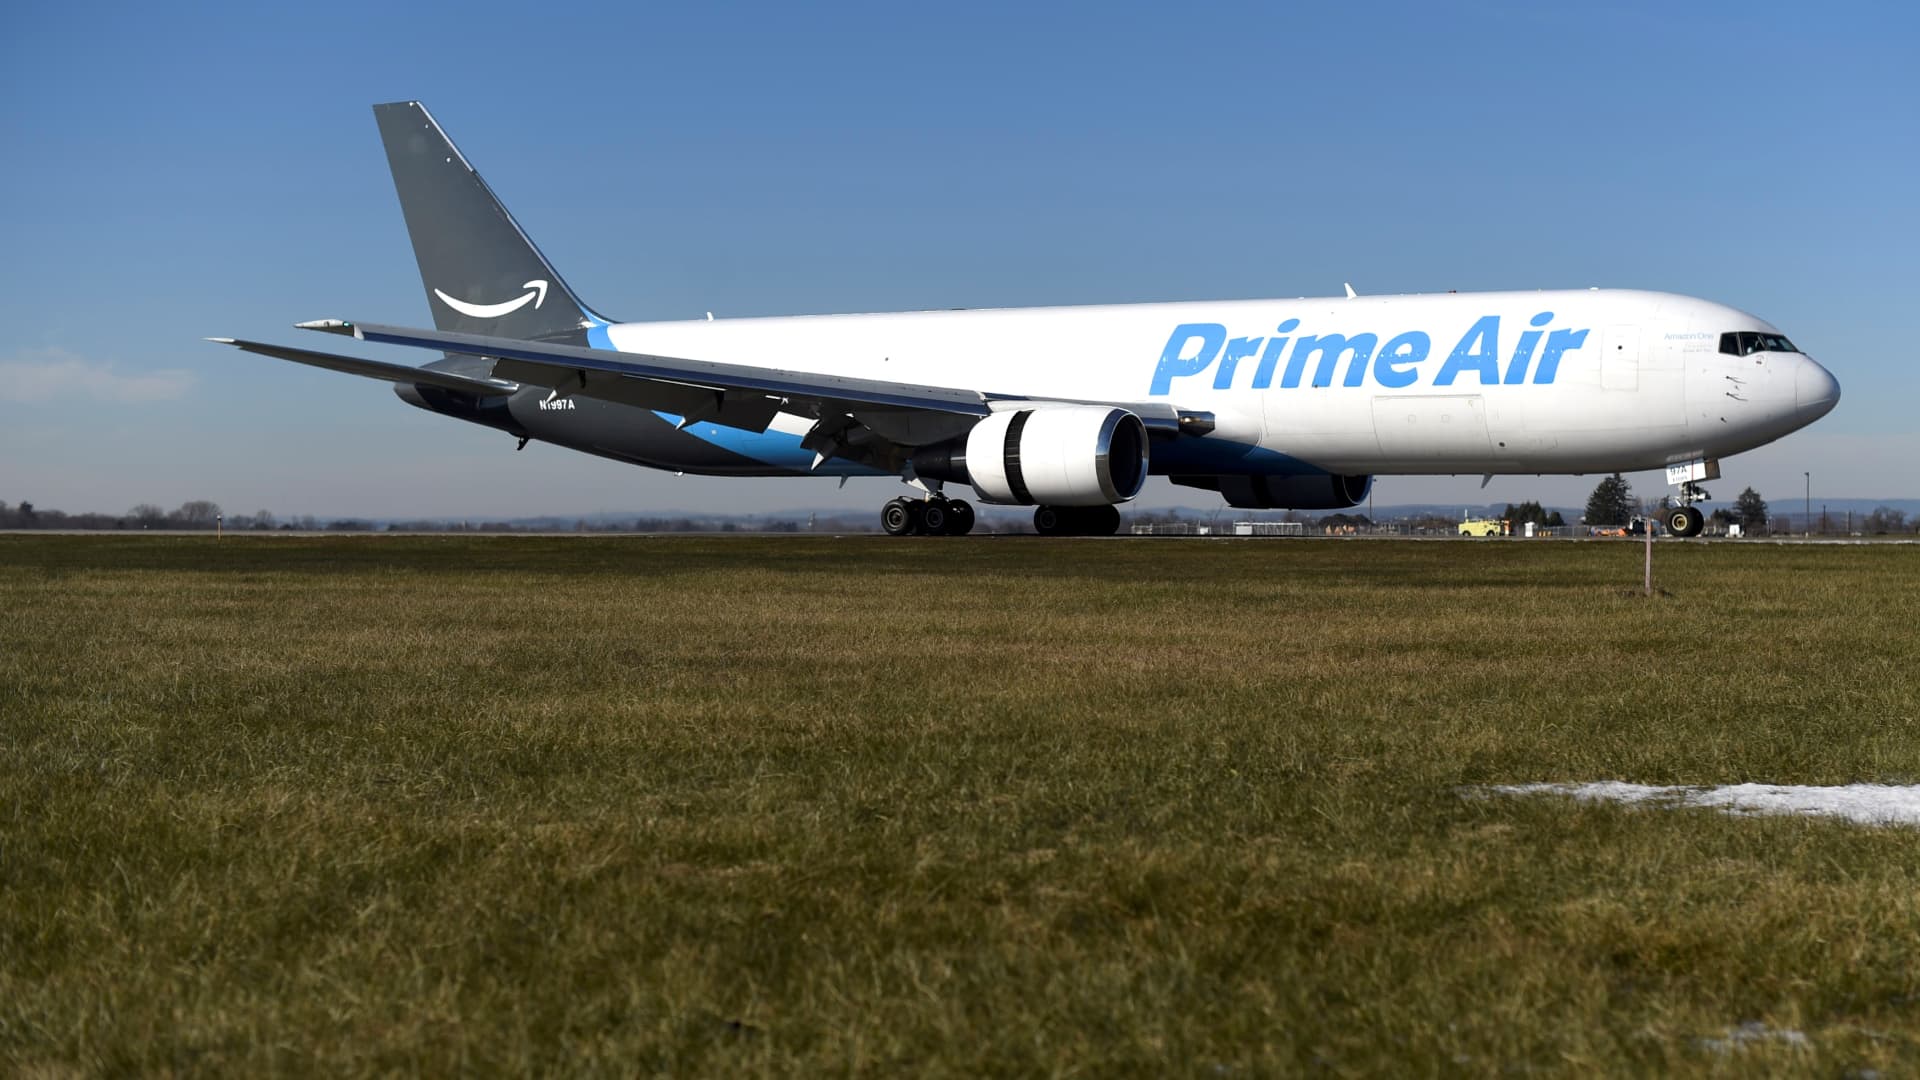 Amazon's air cargo head will now oversee workplace safety unit